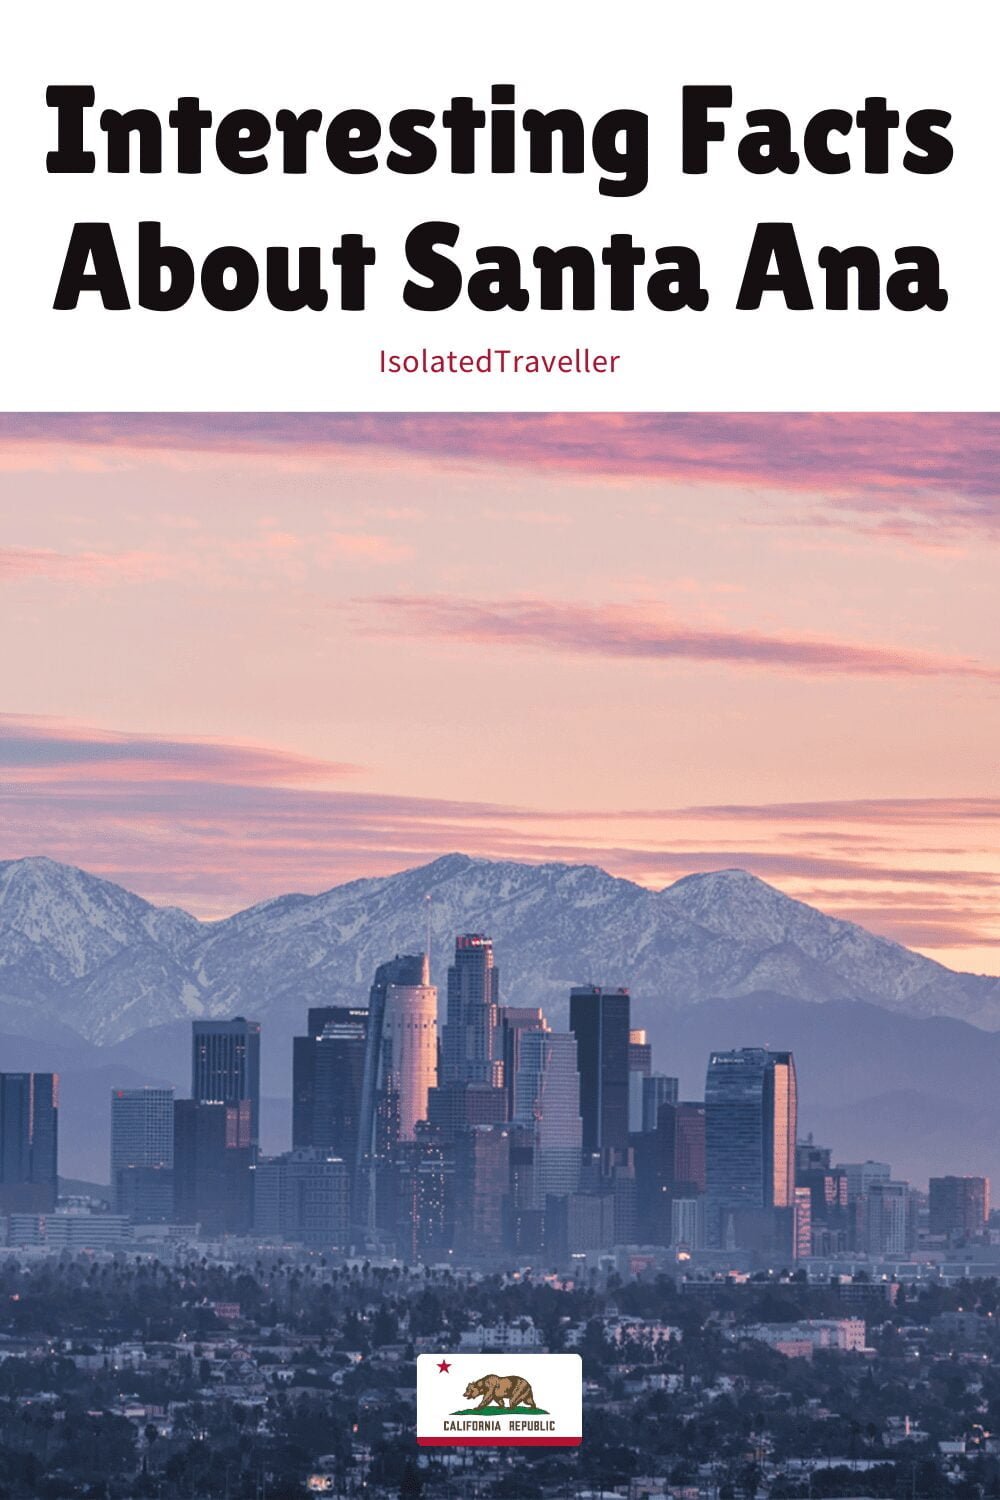 Facts About Santa Ana